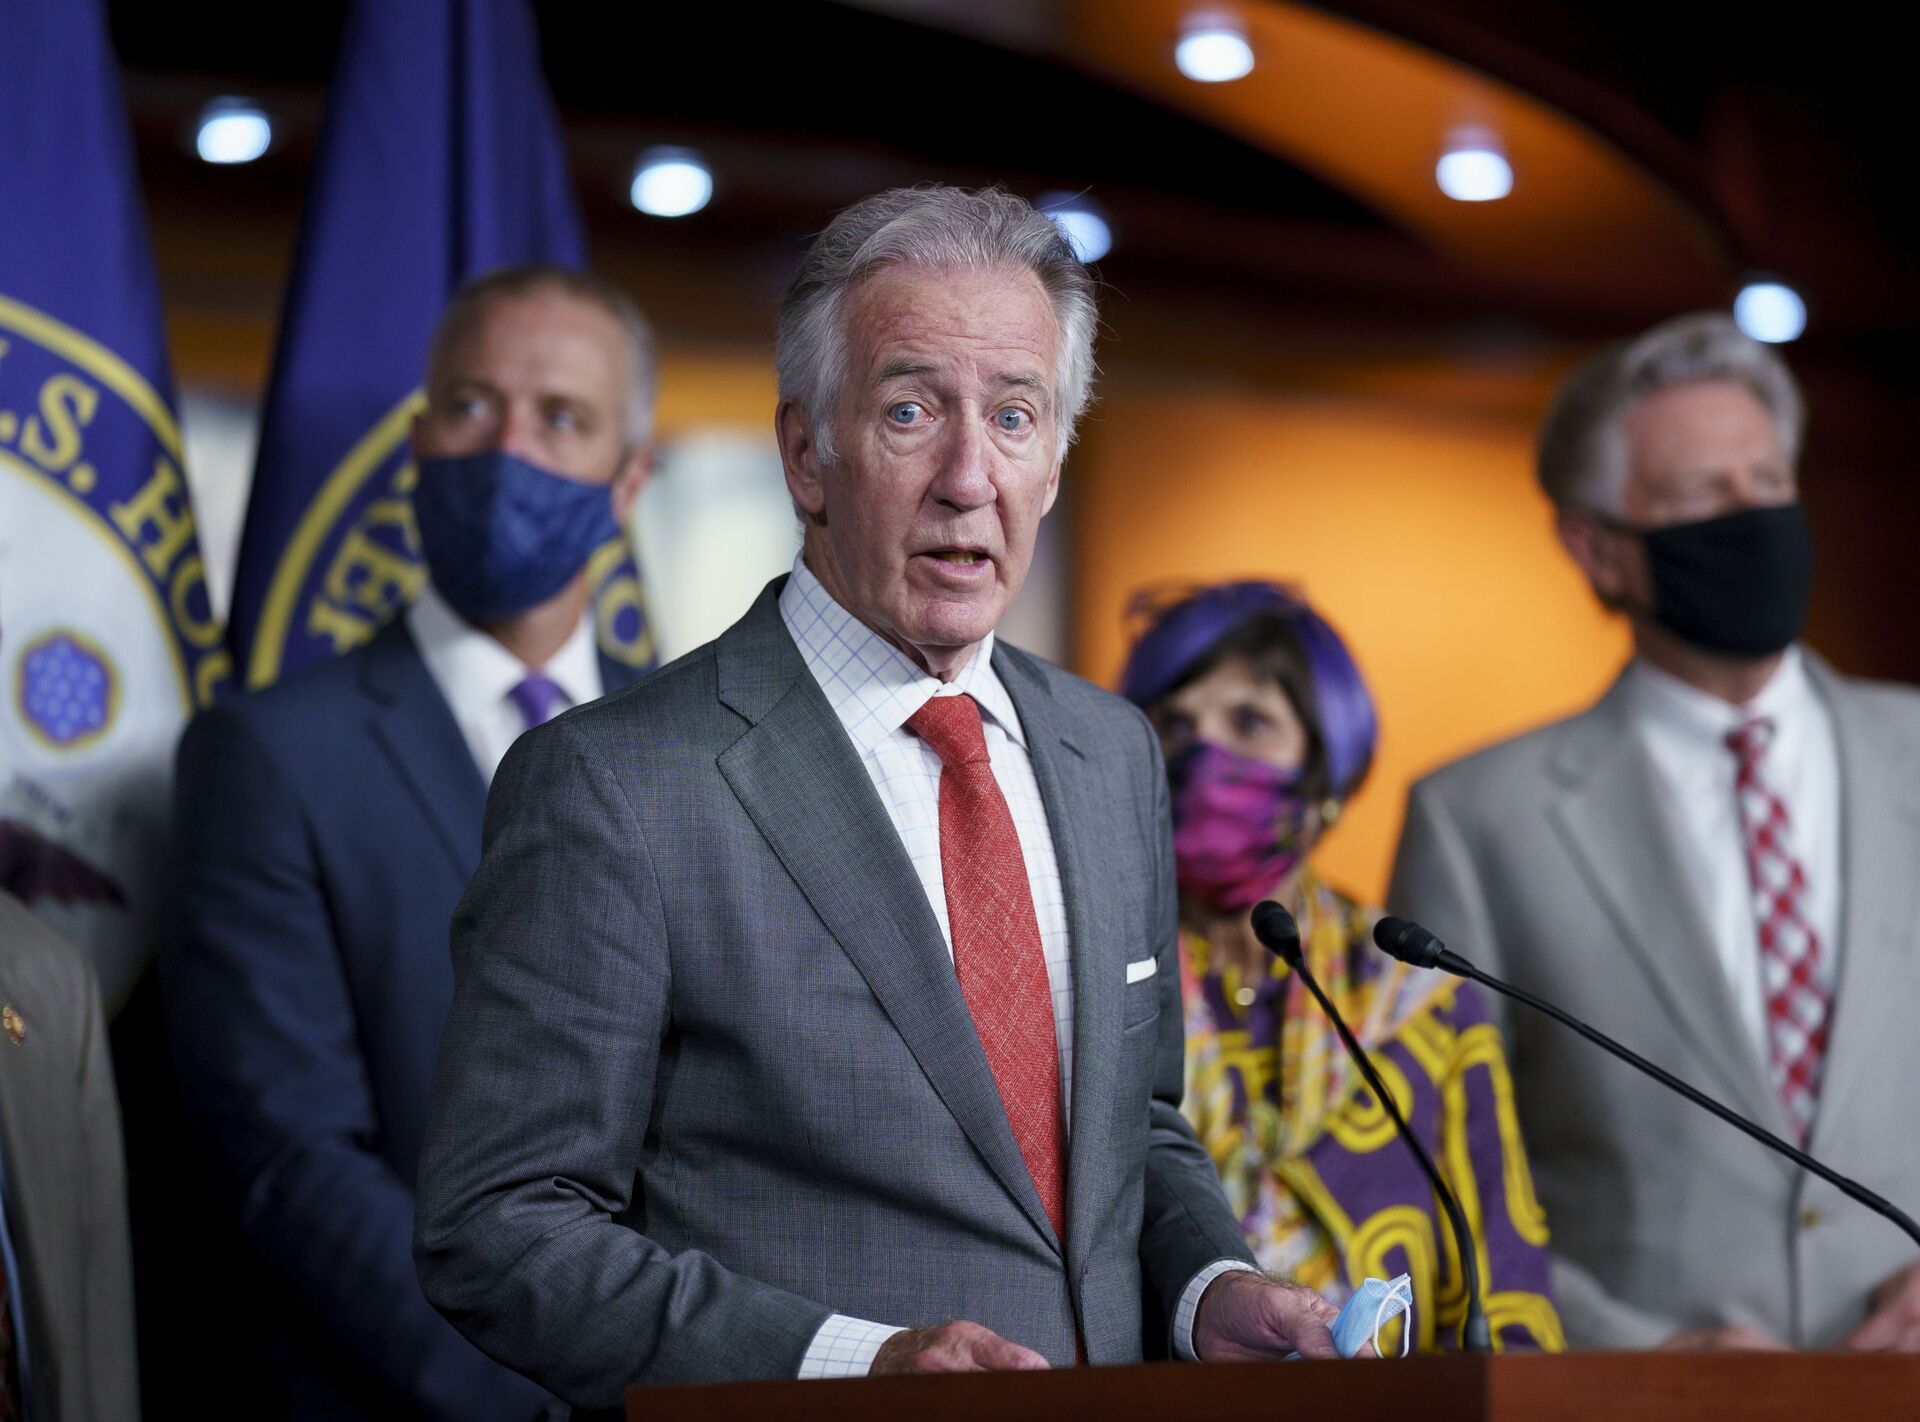 House Ways and Means Committee Chairman Richard Neal, D-Mass., joins other House Democratic leaders at a news conference at the Capitol in Washington, Friday, July 30, 2021. The Justice Department said today the Treasury Department must provide the House Ways and Means Committee former President Donald Trump's tax returns, apparently ending a long legal showdown over the records. - Sputnik International, 1920, 07.09.2021